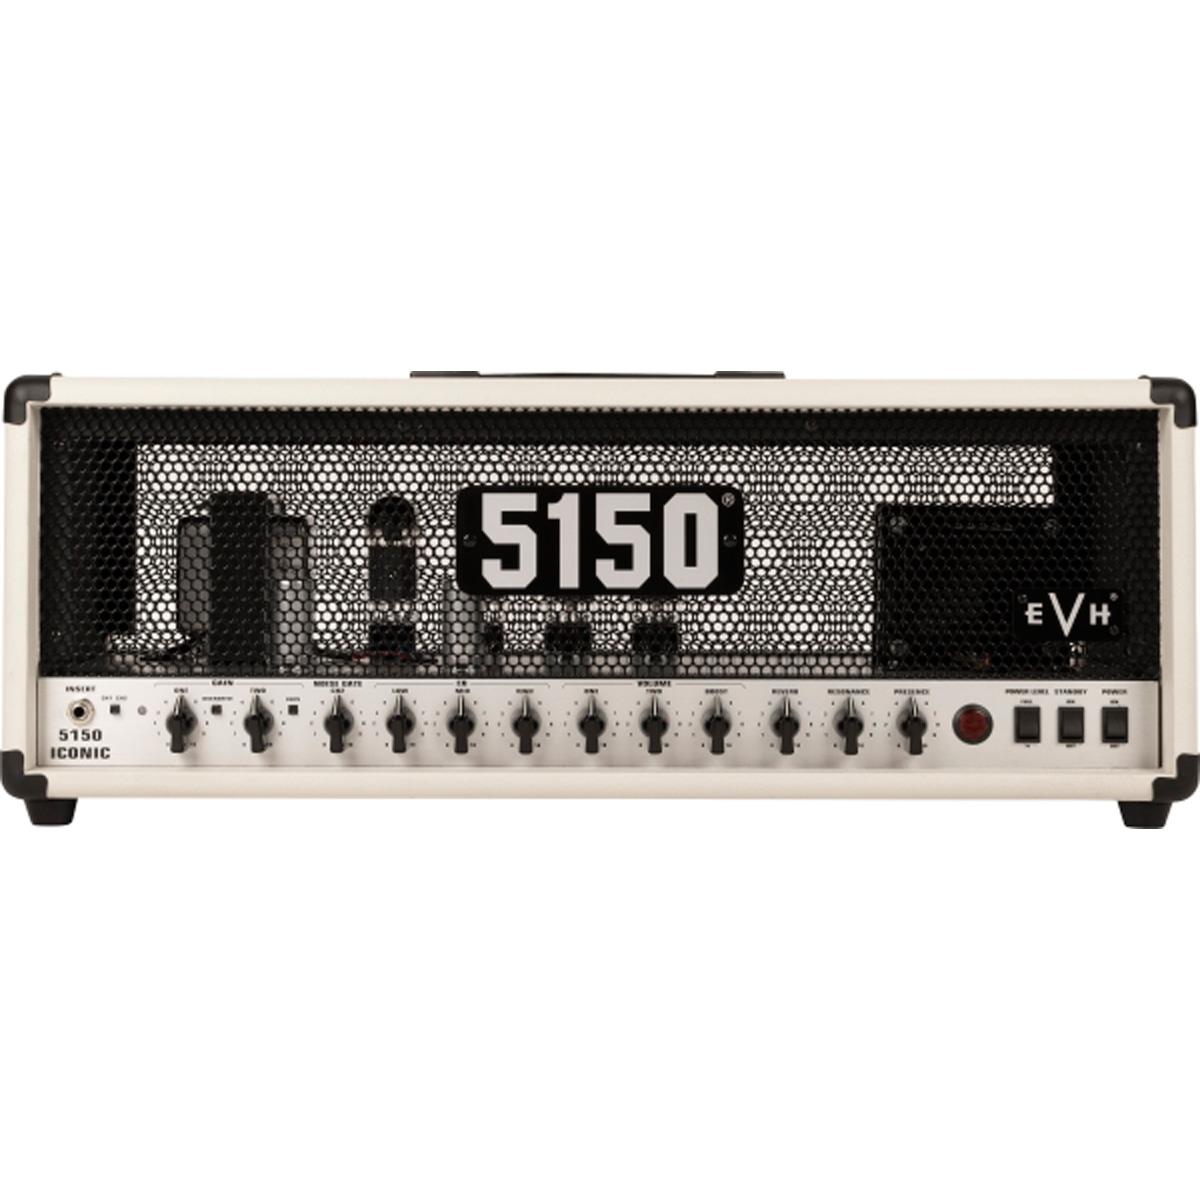 EVH 5150 Iconic Series 80W Amplifier Head, Ivory The EVH 5150 Iconic Series satisfies the needs of gigging and recording guitarists craving that pure and powerful EVH tube tone, but at a more affordable price. Evolving from the revered EVH 5150III amplifiers, the Iconic Series delivers the searing sound and growling gain that the late-Eddie Van Halen made famous throughout his groundbreaking career.Designed by renowned amp engineer, James Brown, the 5150 Iconic Series 80W Head is powered by four JJ 6L6 power tubes and voiced with two JJ ECC83S preamp tubes, providing all the firepower the modern guitarist needs.This head features two channels with an extra voicing on each for even more versatility. The Green channel boasts an overdrive button to run from lush clean tones to increased gain, while the Red channel's burn button adds fiery crunch that's ideal for blistering leads.Each channel houses its own gain and volume controls, allowing for level-matching the volume when switching between the clean and high gain channels. The channel two noise gate's quick attack suppresses any hiss while ensuring all staccato riffing is articulate and crisp, not choked and choppy. The Boost control on Channel 2 allows you to add another 10Db of foot-switchable volume to your tone - perfect for ensuring your solos cut through the mix. The control panel also includes shared EQ (Low, Mid and High), global resonance and presence knobs to adjust the low- and high-end aspects of your tone, and a global reverb control to add the perfect amount of bounce and decay for any room.Other features include a two-button footswitch, effects loop, dual parallel speaker output jacks, 1/4 power switch to reduce wattage-allowing you to crank the amp and still preserve tone but without destroying your neighbor's solitude, and a speaker-emulated DI XLR with power amp mute for accurate all-tube EVH tone for recording direct or using through any PA system.Sporting sophisticated and distinctive EVH style, the 5150 Iconic Series 80-watt head is wrapped in either Black or Ivory textured vinyl with a brushed aluminum front panel and black steel grille featuring silver and black 5150 and EVH logo badges. This head is finished off with vintage-style chicken-head knobs, red LED jewel indicator and molded black plastic top handle. A high-quality fitted cover is available as an EVH Accessory.